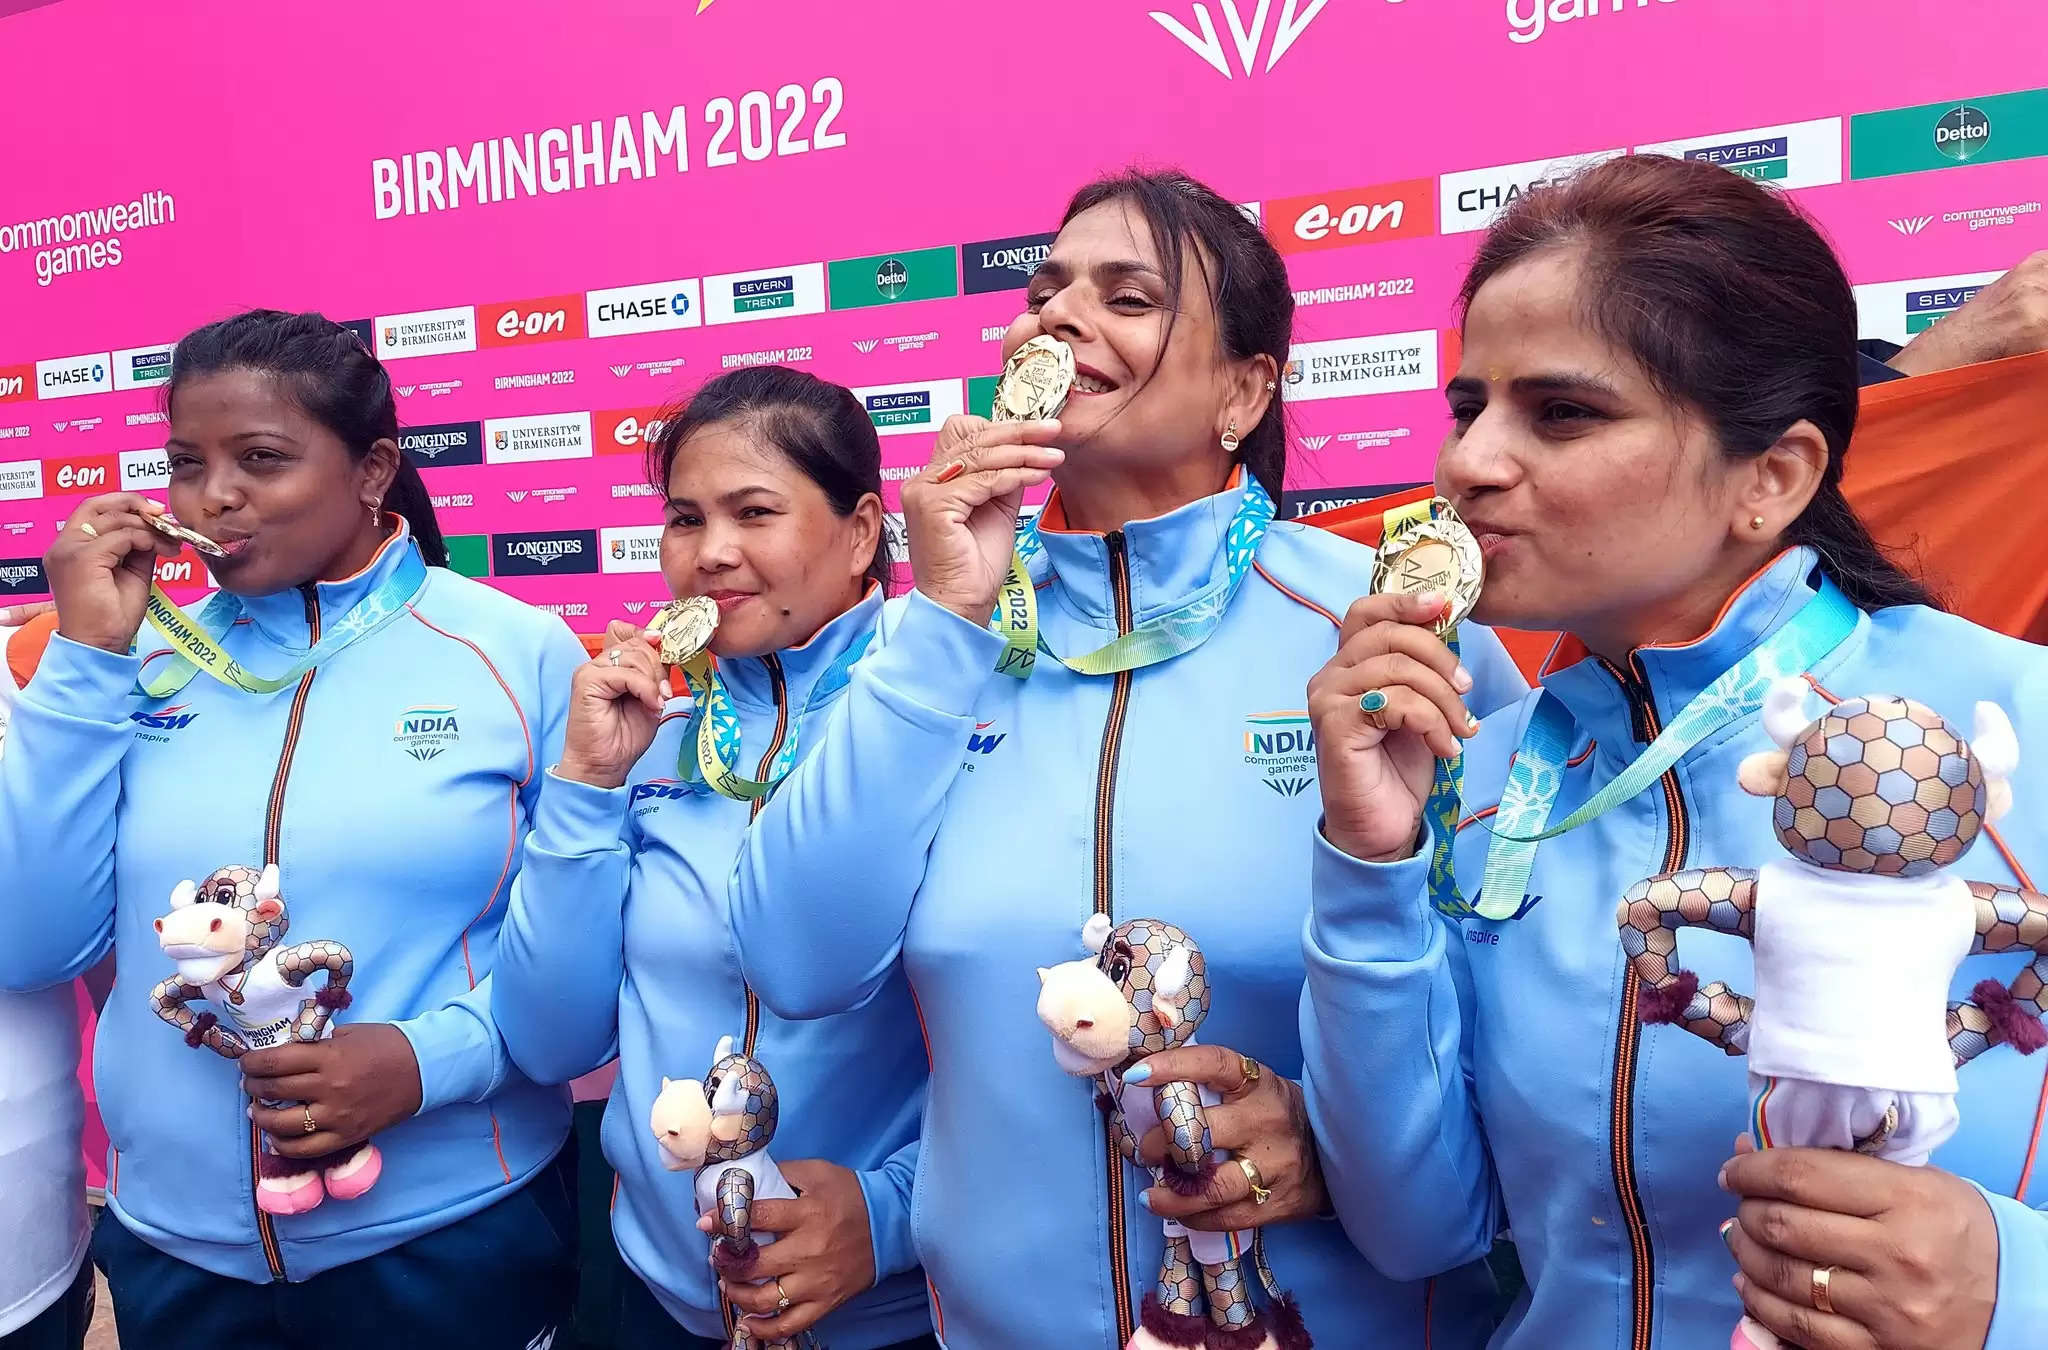 Historic GOLD in Lawn Bowls for India at the Commonwealth Games